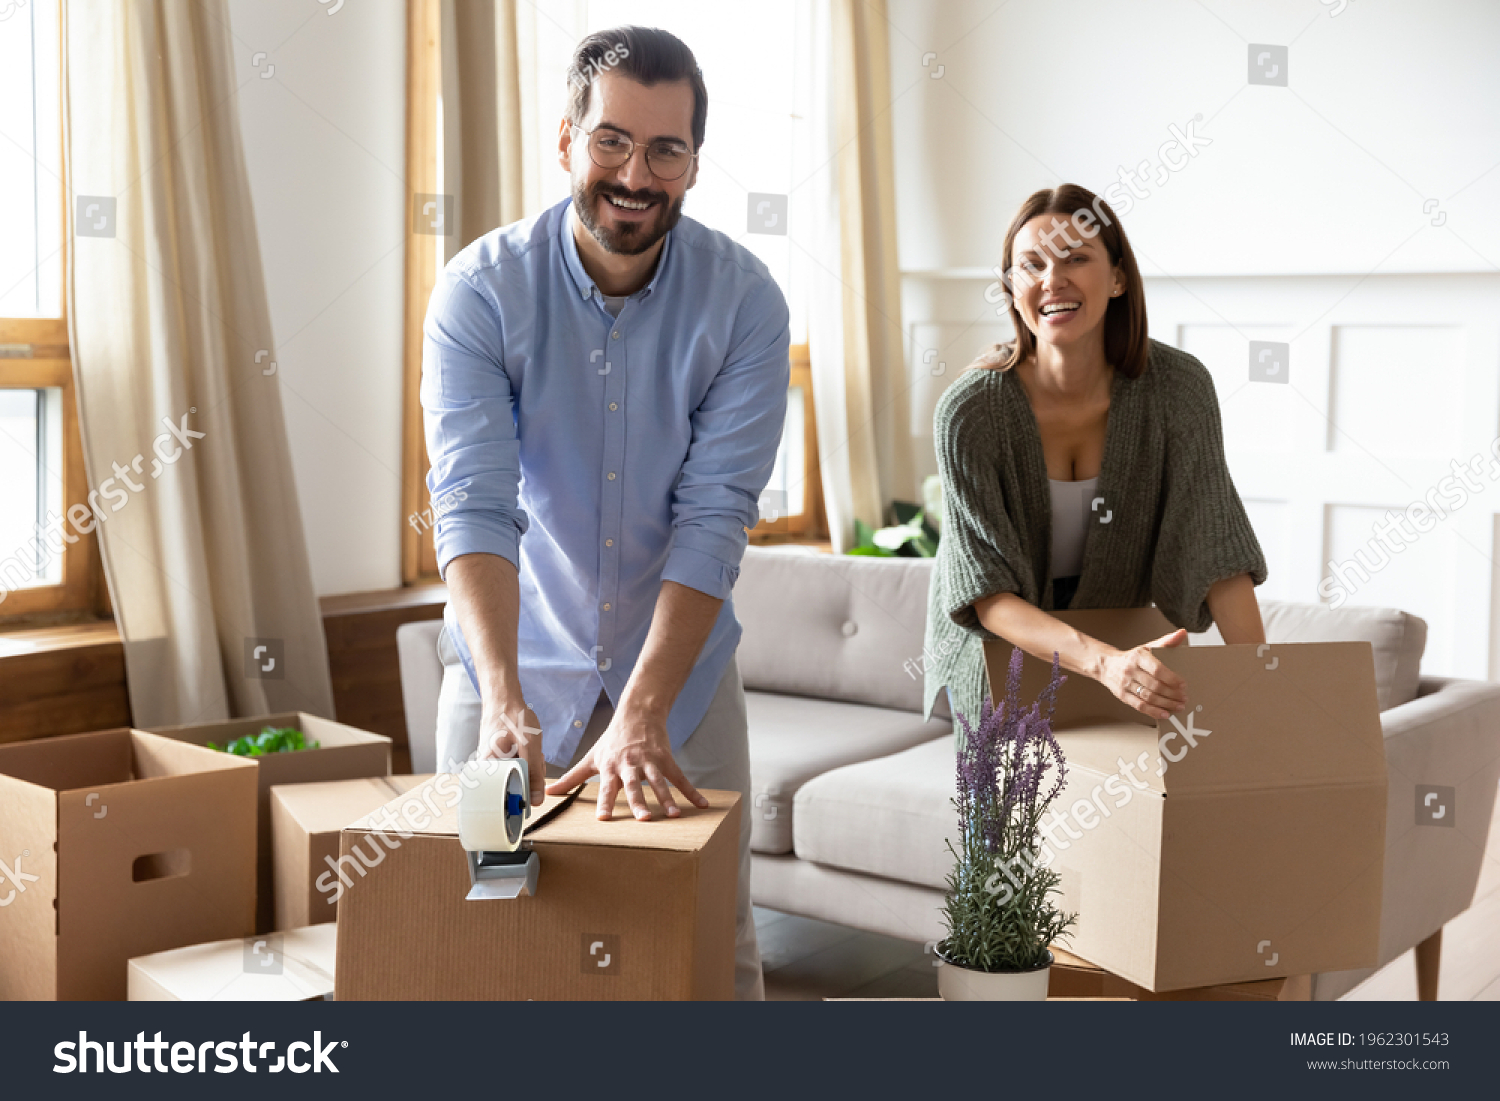 Portrait of smiling young Caucasian couple renters pack boxes packages relocate together. Happy man and woman tenants seal parcels moving to new home. Relocation, rental, rent concept. #1962301543